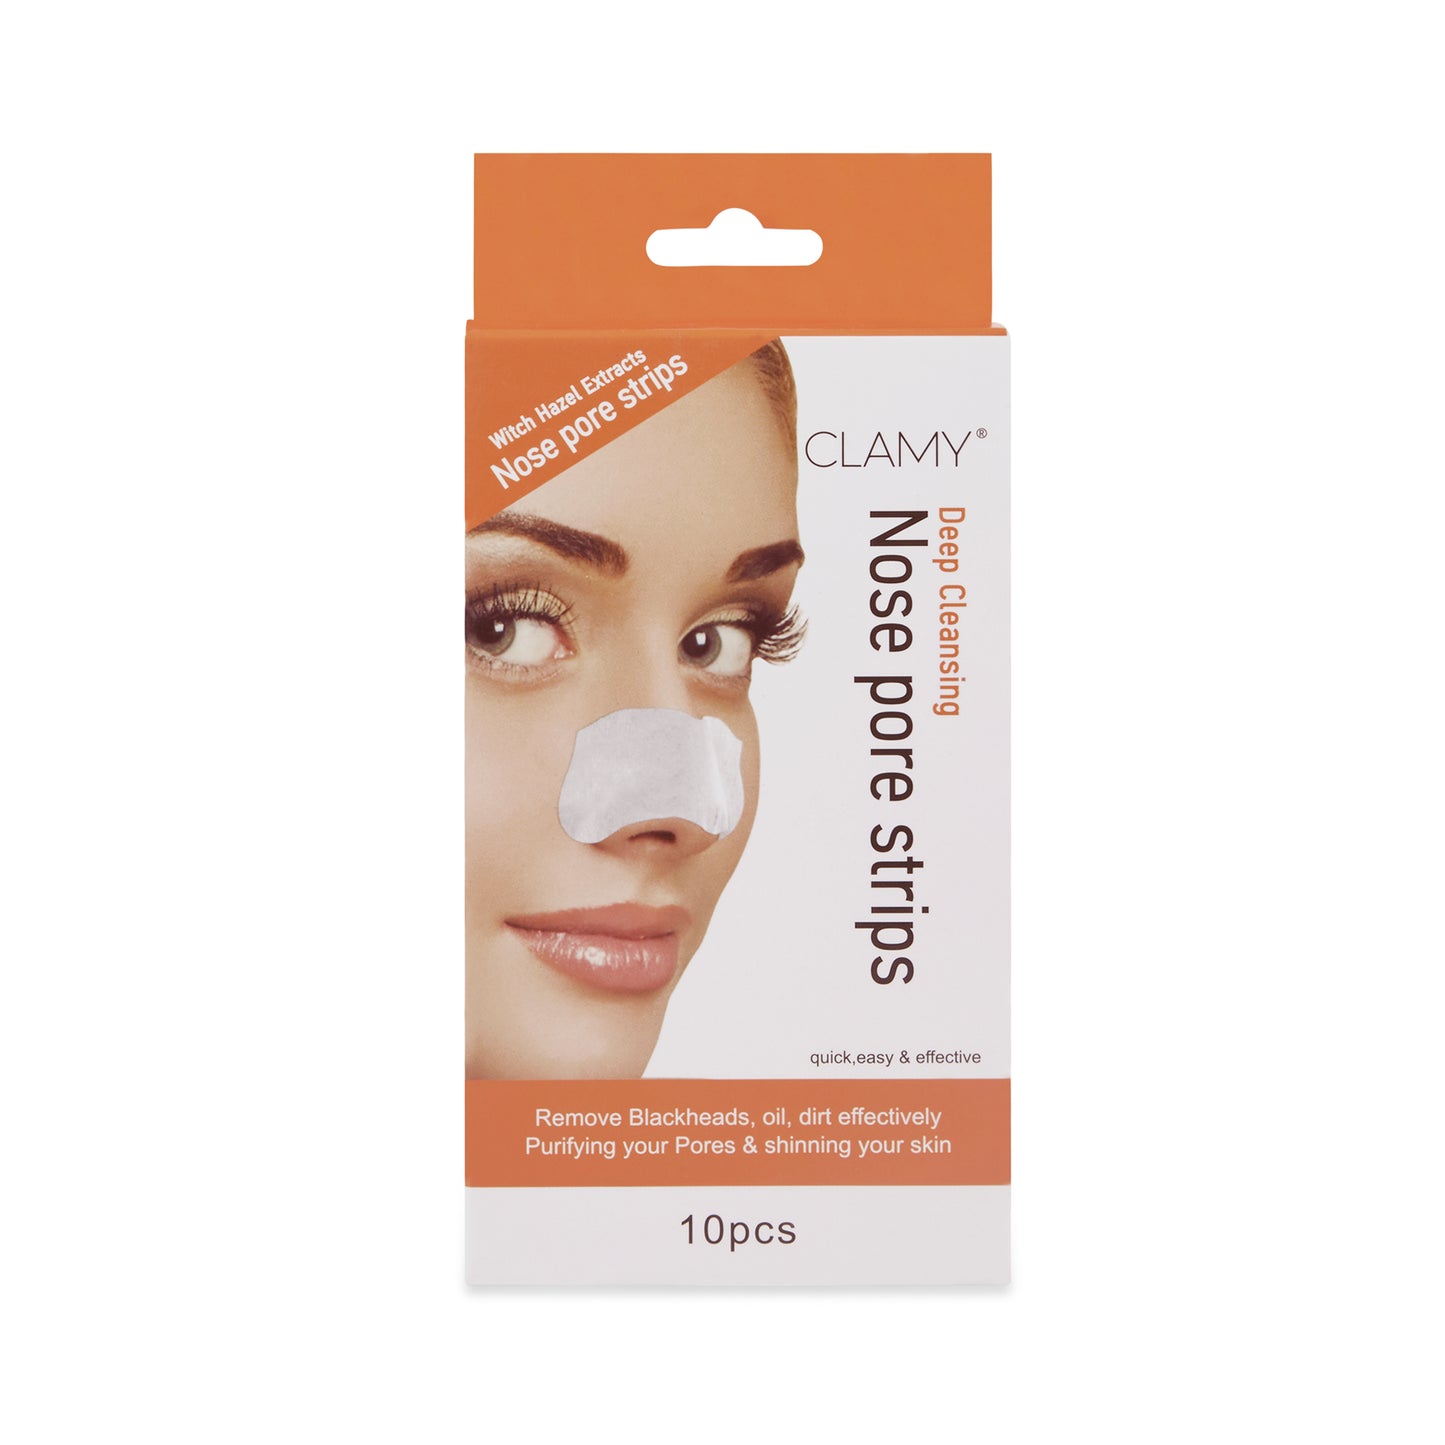 Deep Cleansing Nose Pore Strips Removes Blackheads Oil Dirt & Cleanses Pores, 10 Strips